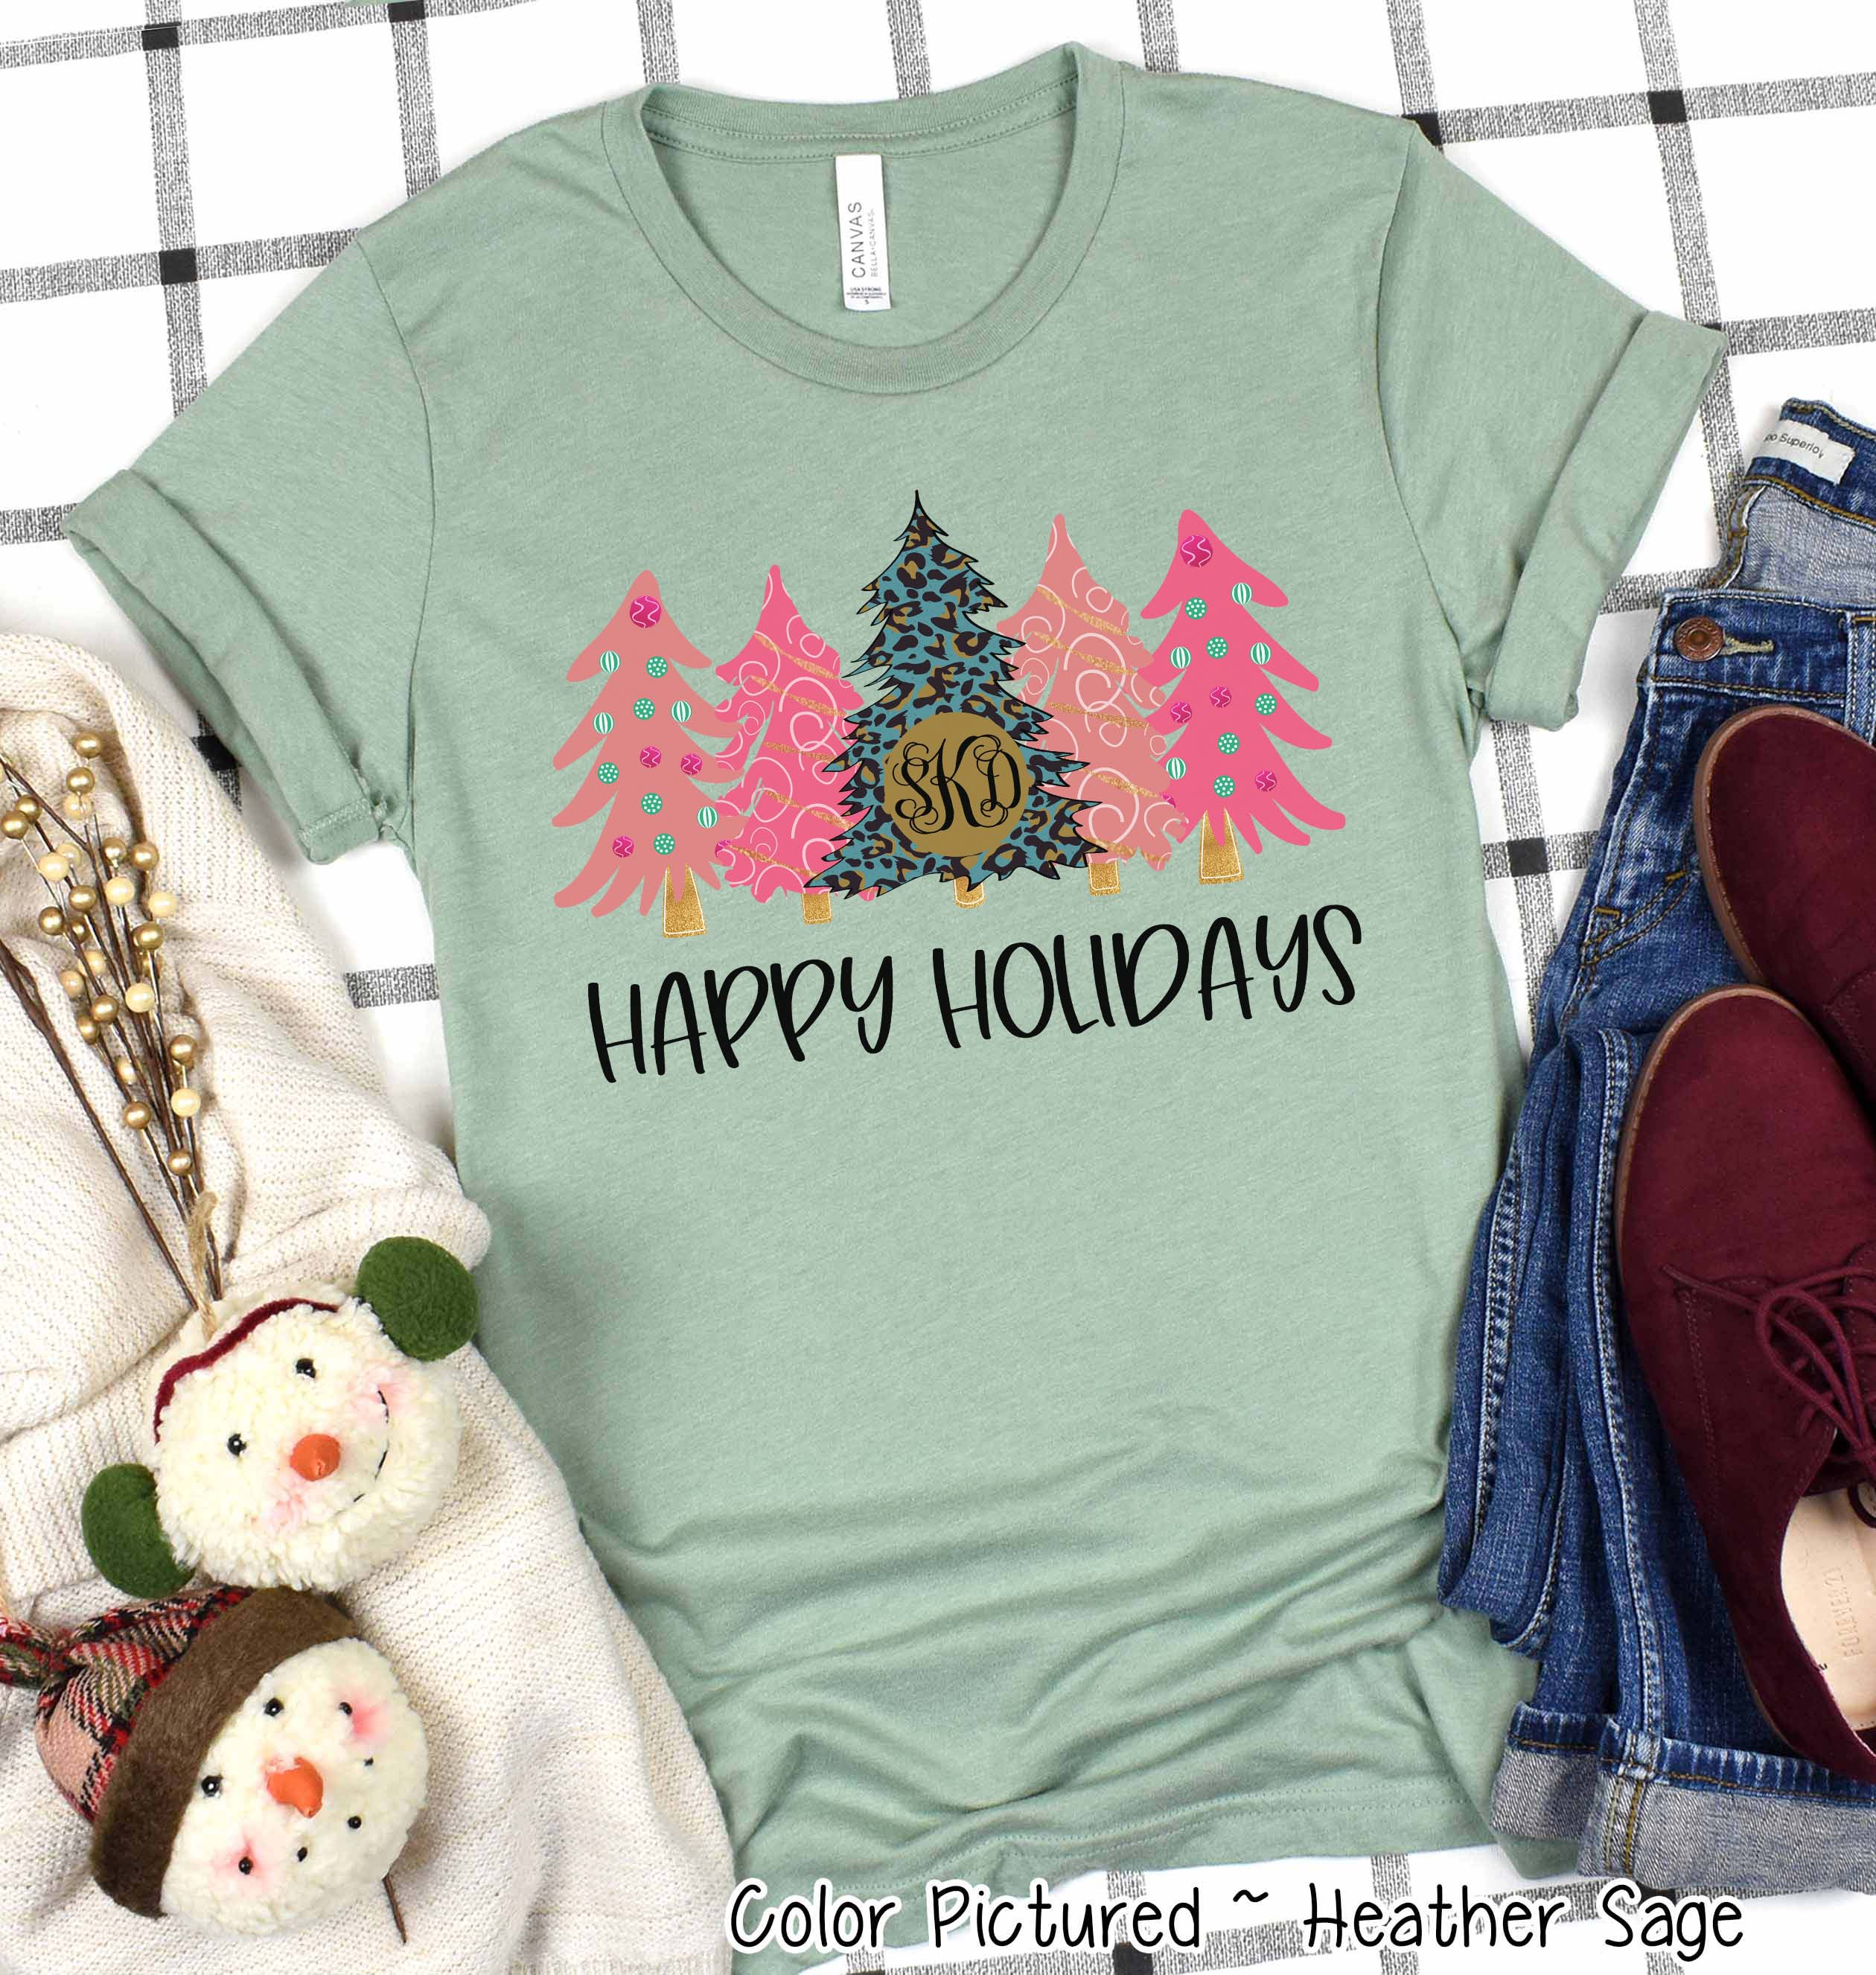 Monogrammed Blue Leopard and Pink Christmas Trees Tee